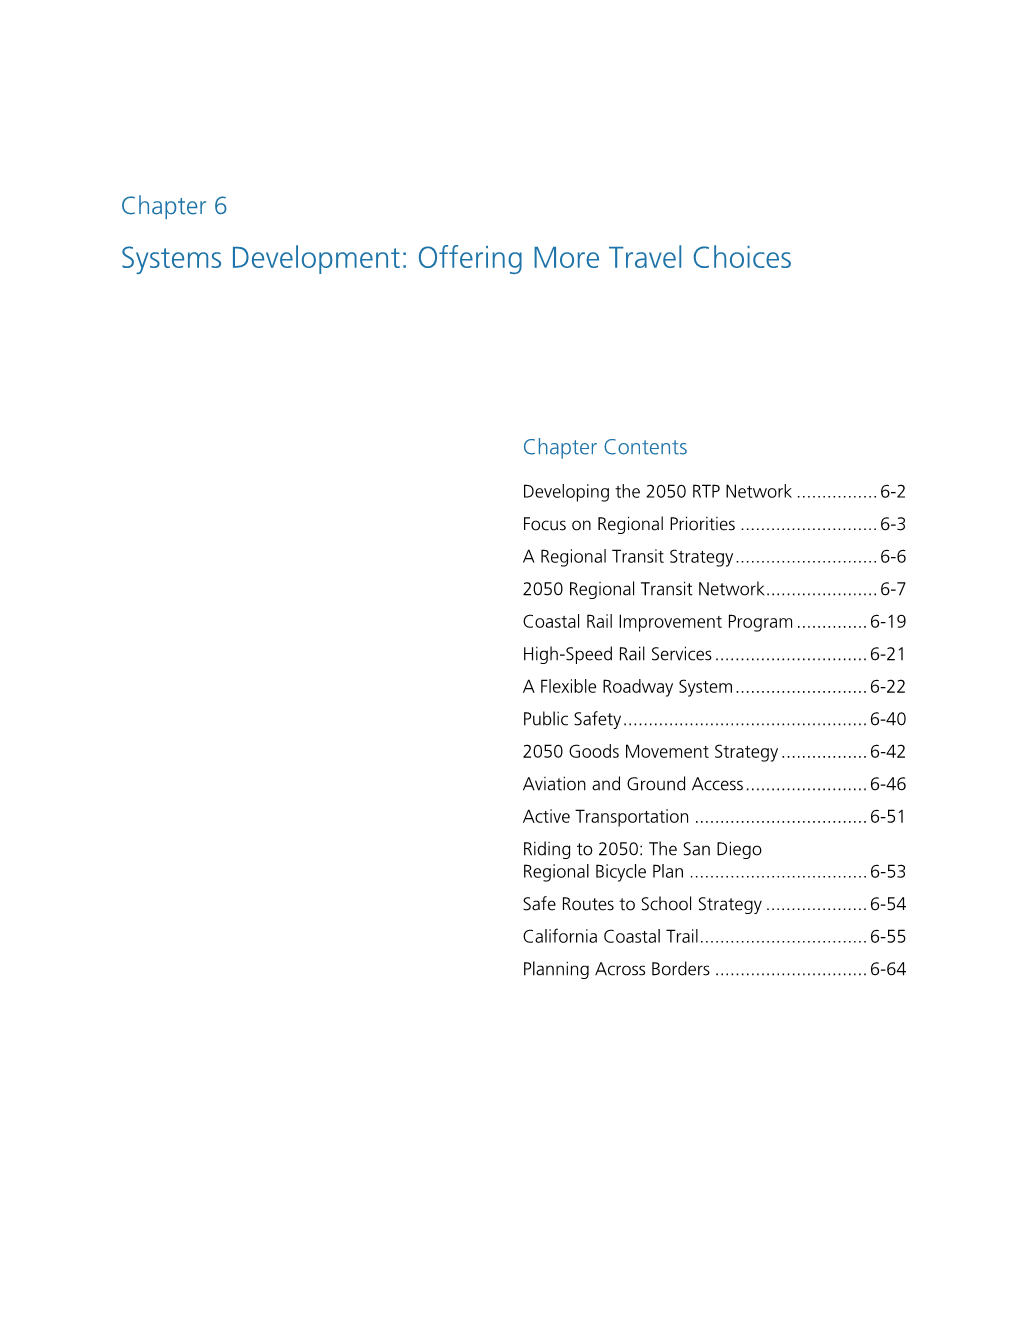 Chapter 6 Systems Development: Offering More Travel Choices